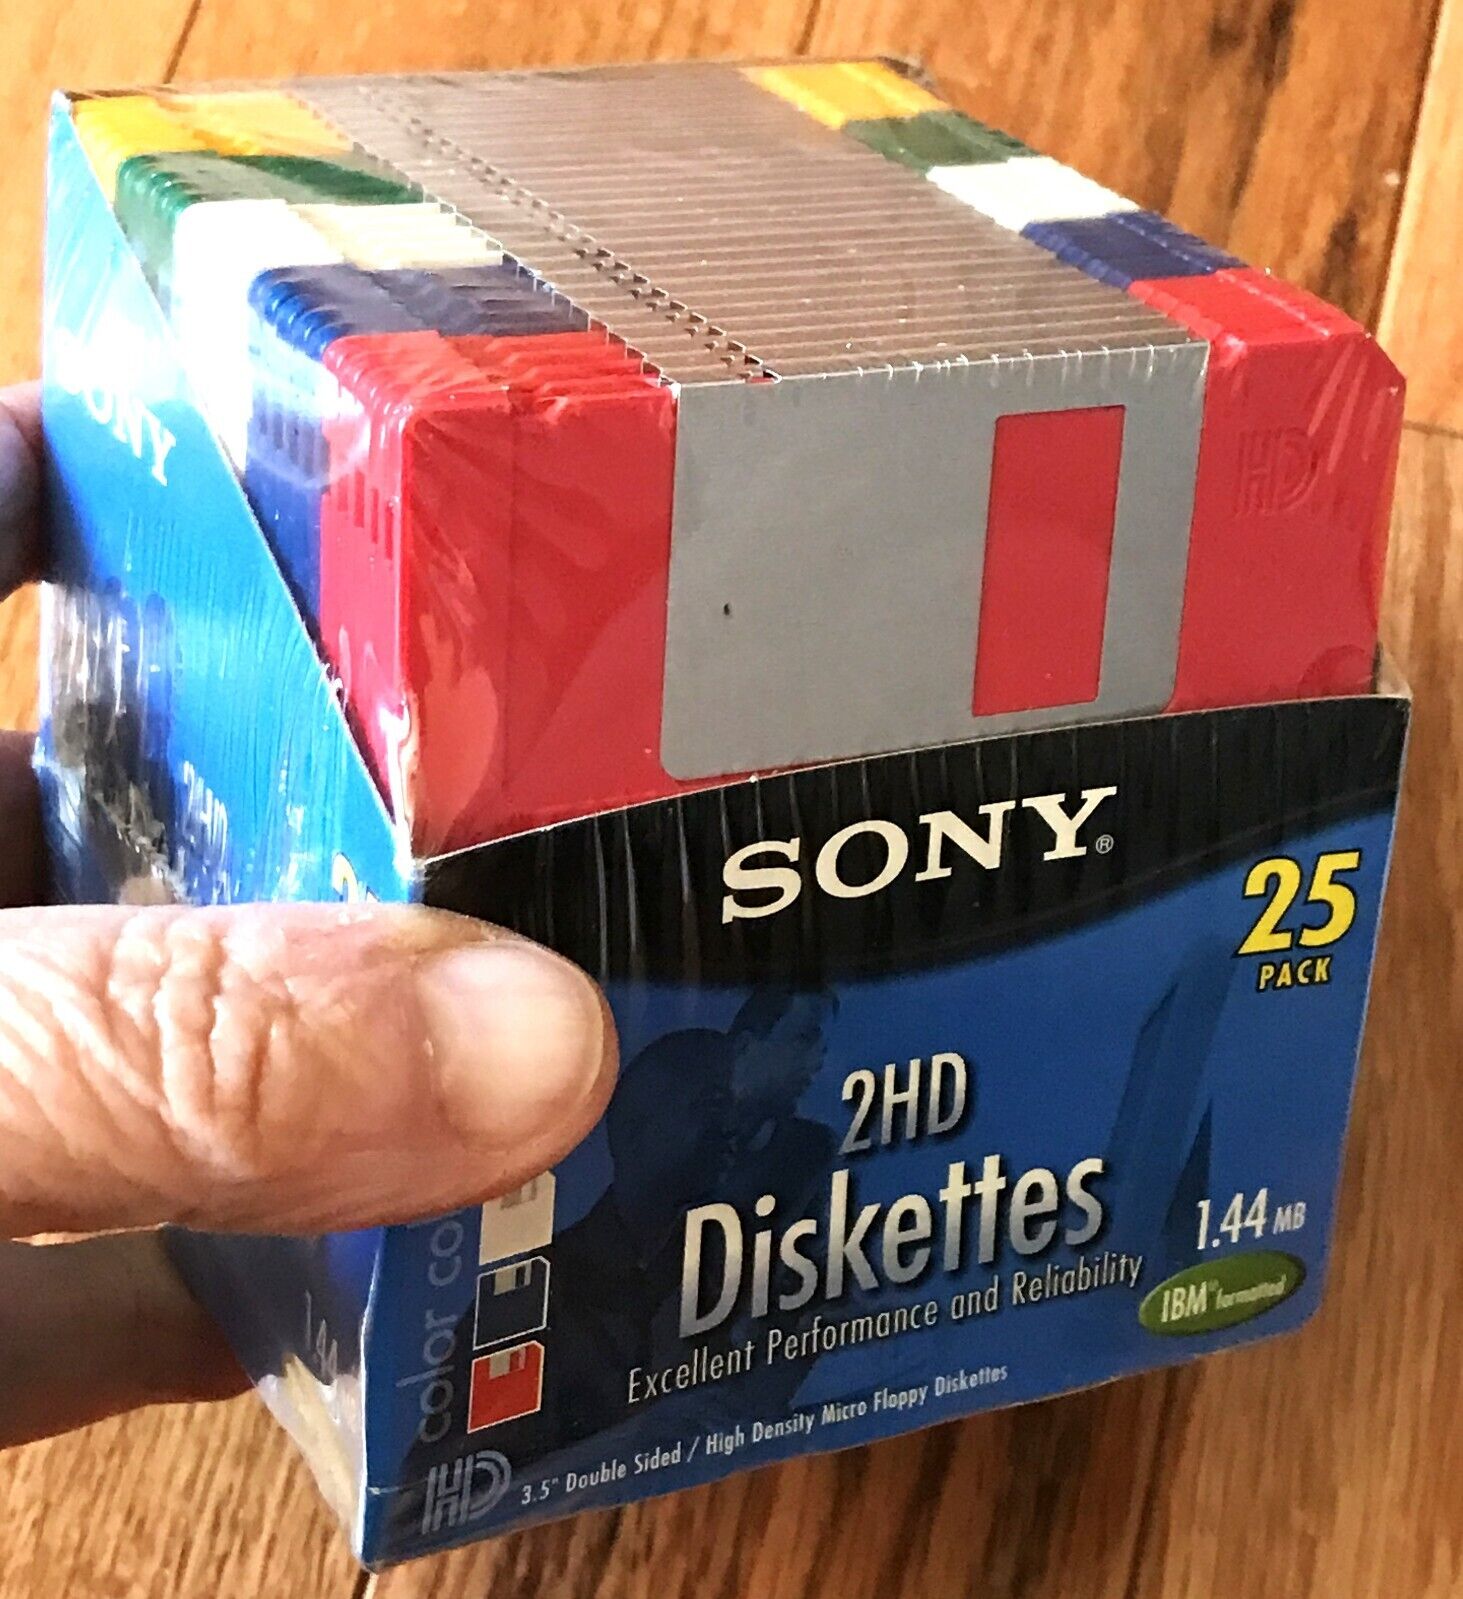 SONY 2HD 1.44MB 3.5 In Double Sided Floppy Diskettes 25 Pack Sealed Never Opened